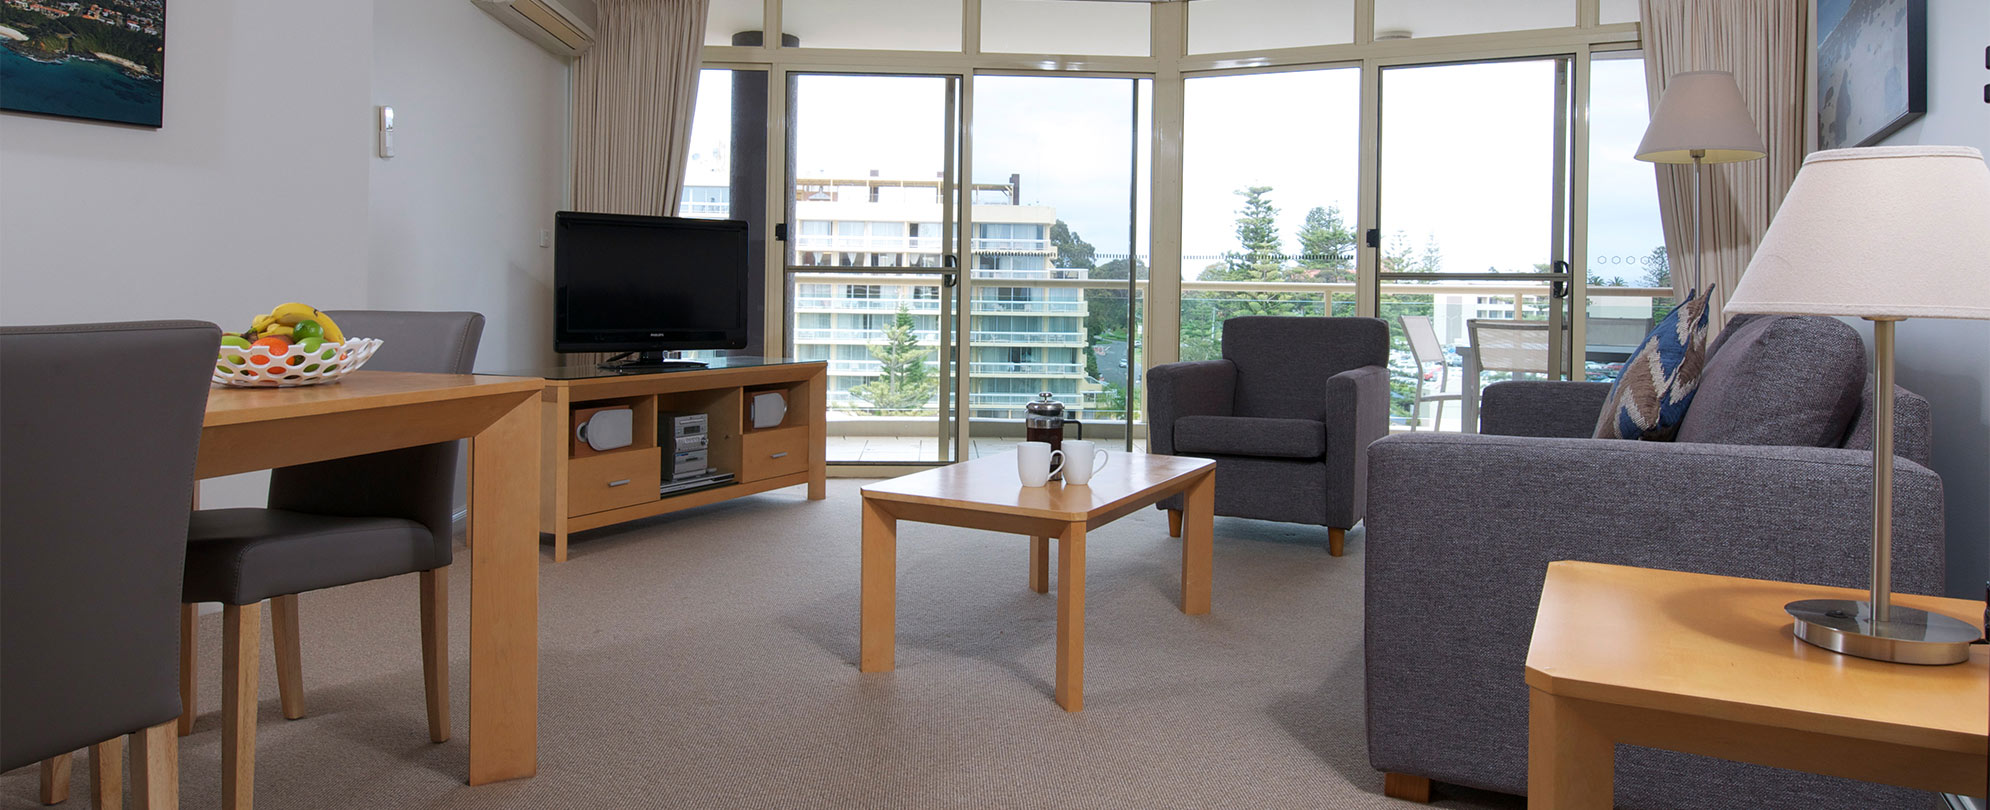 Living room of suite with floor to ceiling windows, couches and tv at Club Wyndham Port Macquarie.